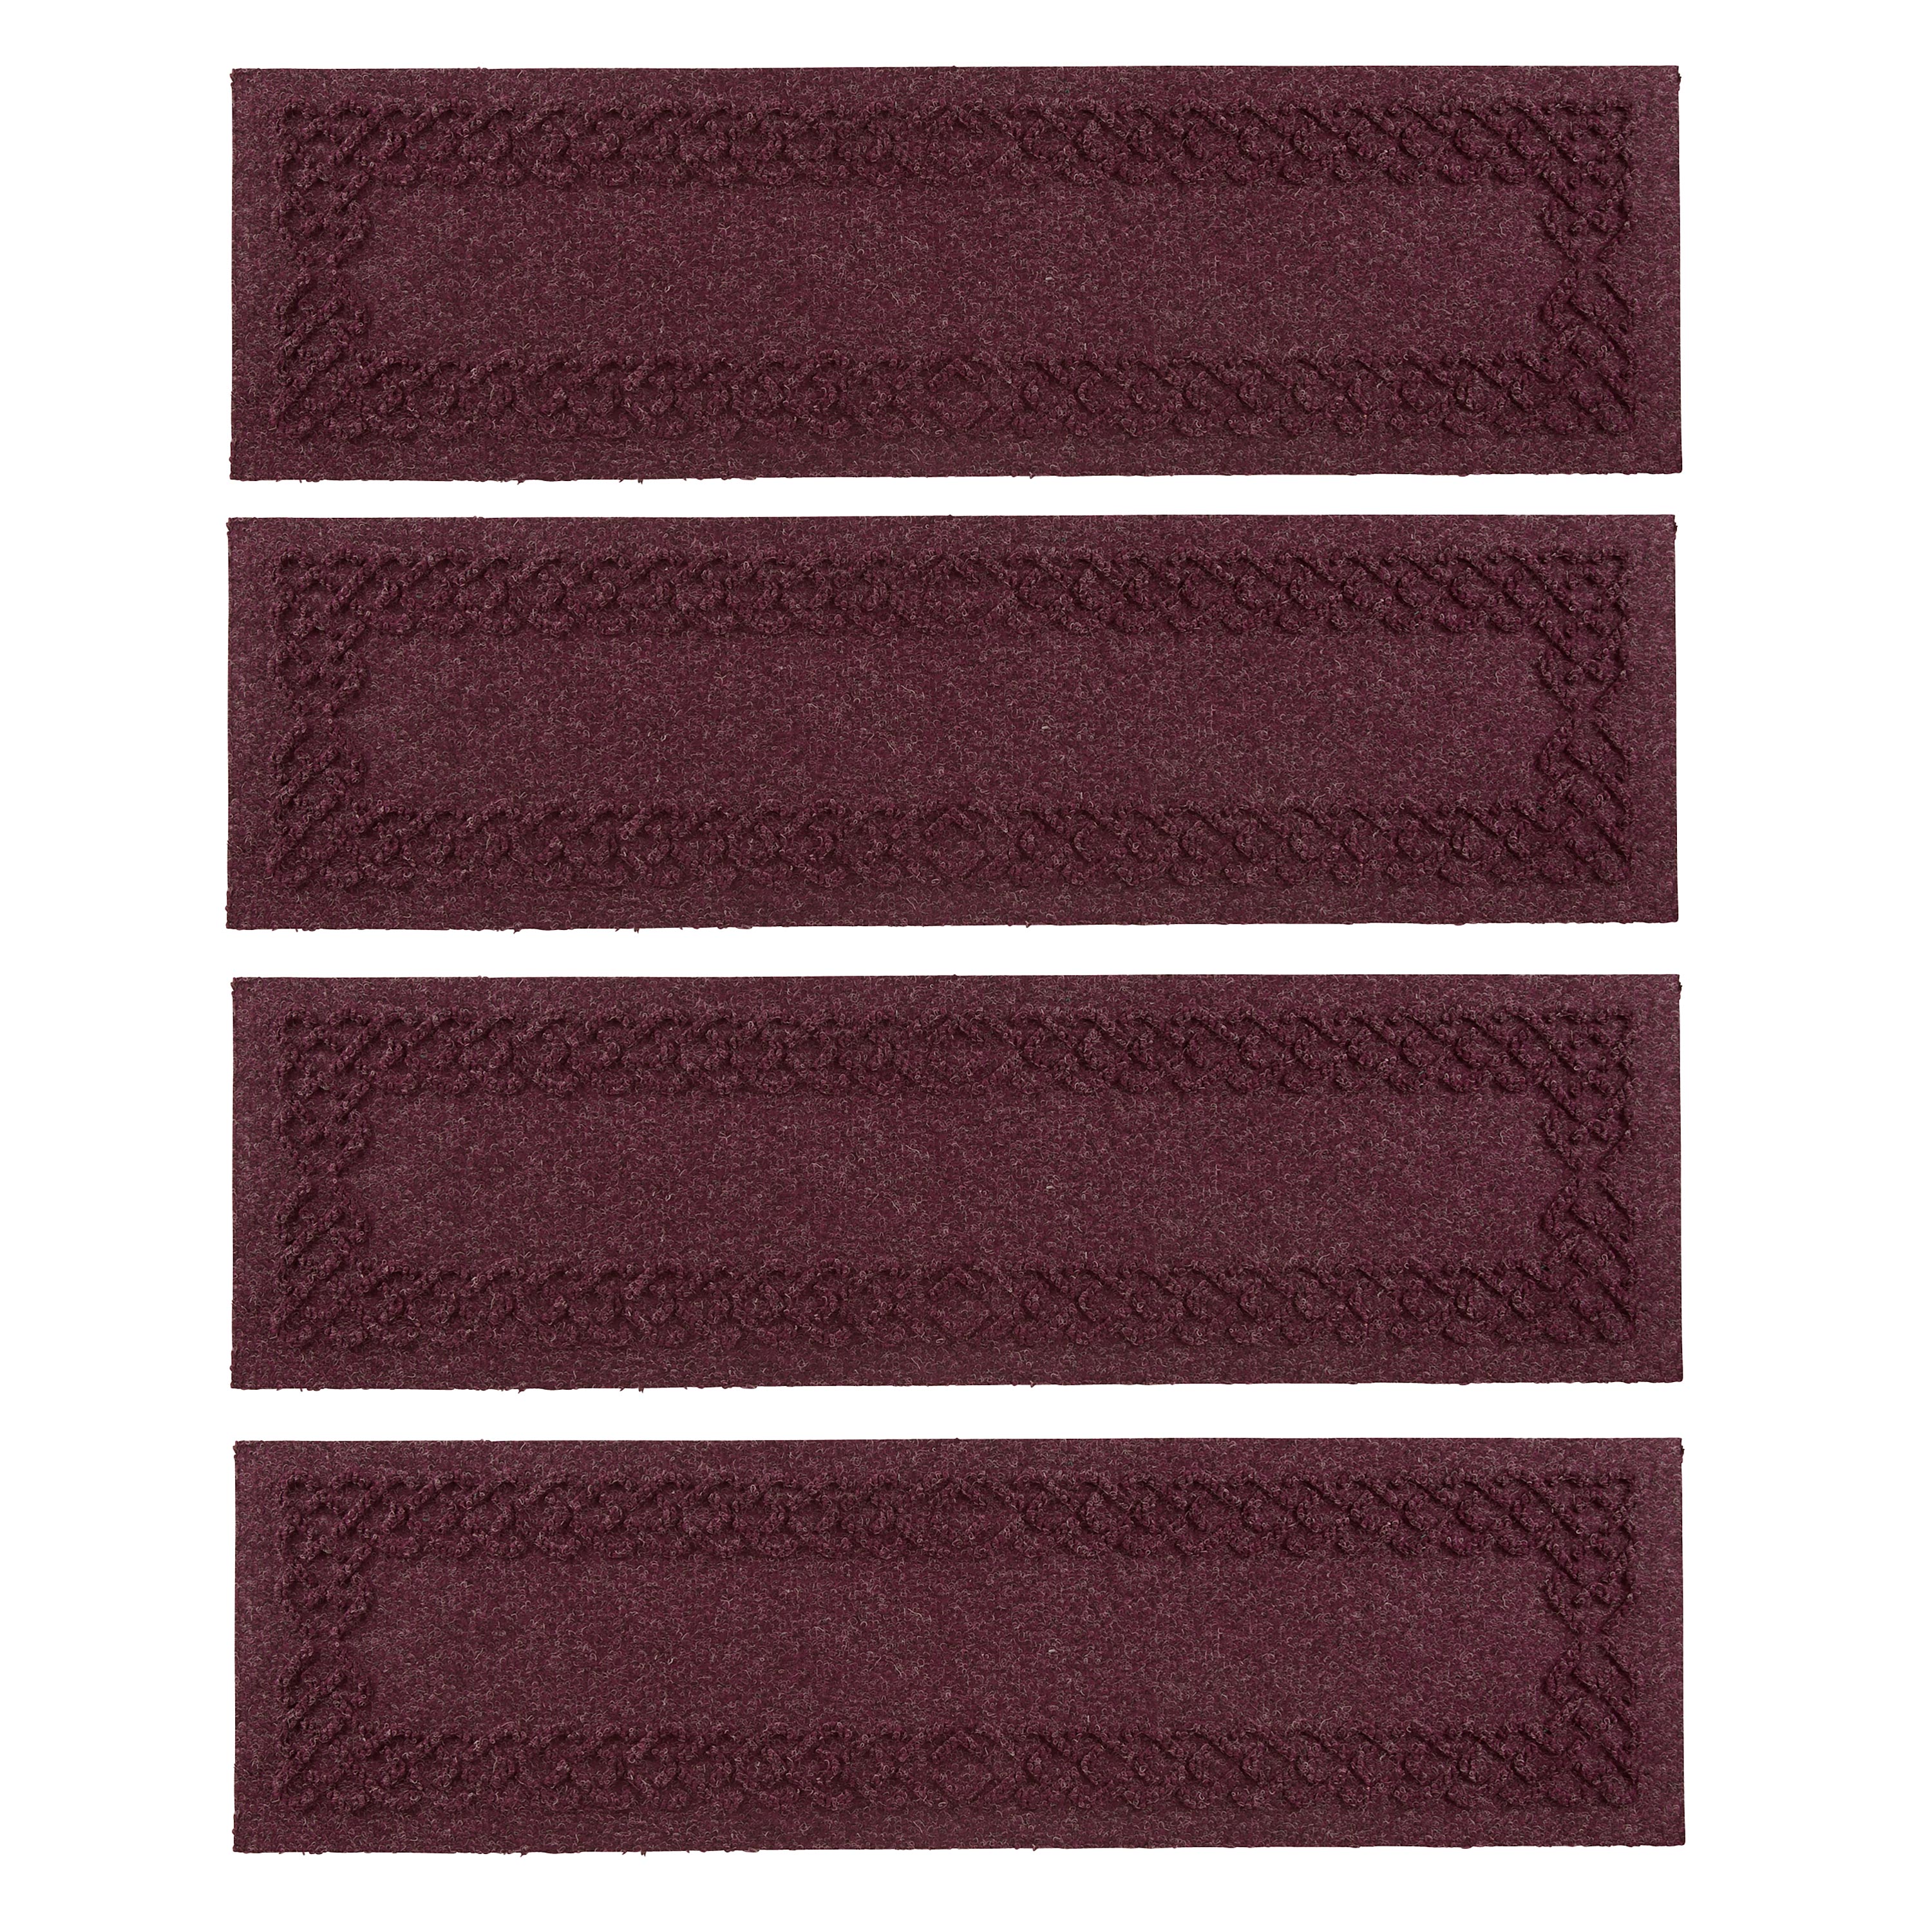 Image of Waterhog Cable Weave Stair Tread Mats, Set of 4